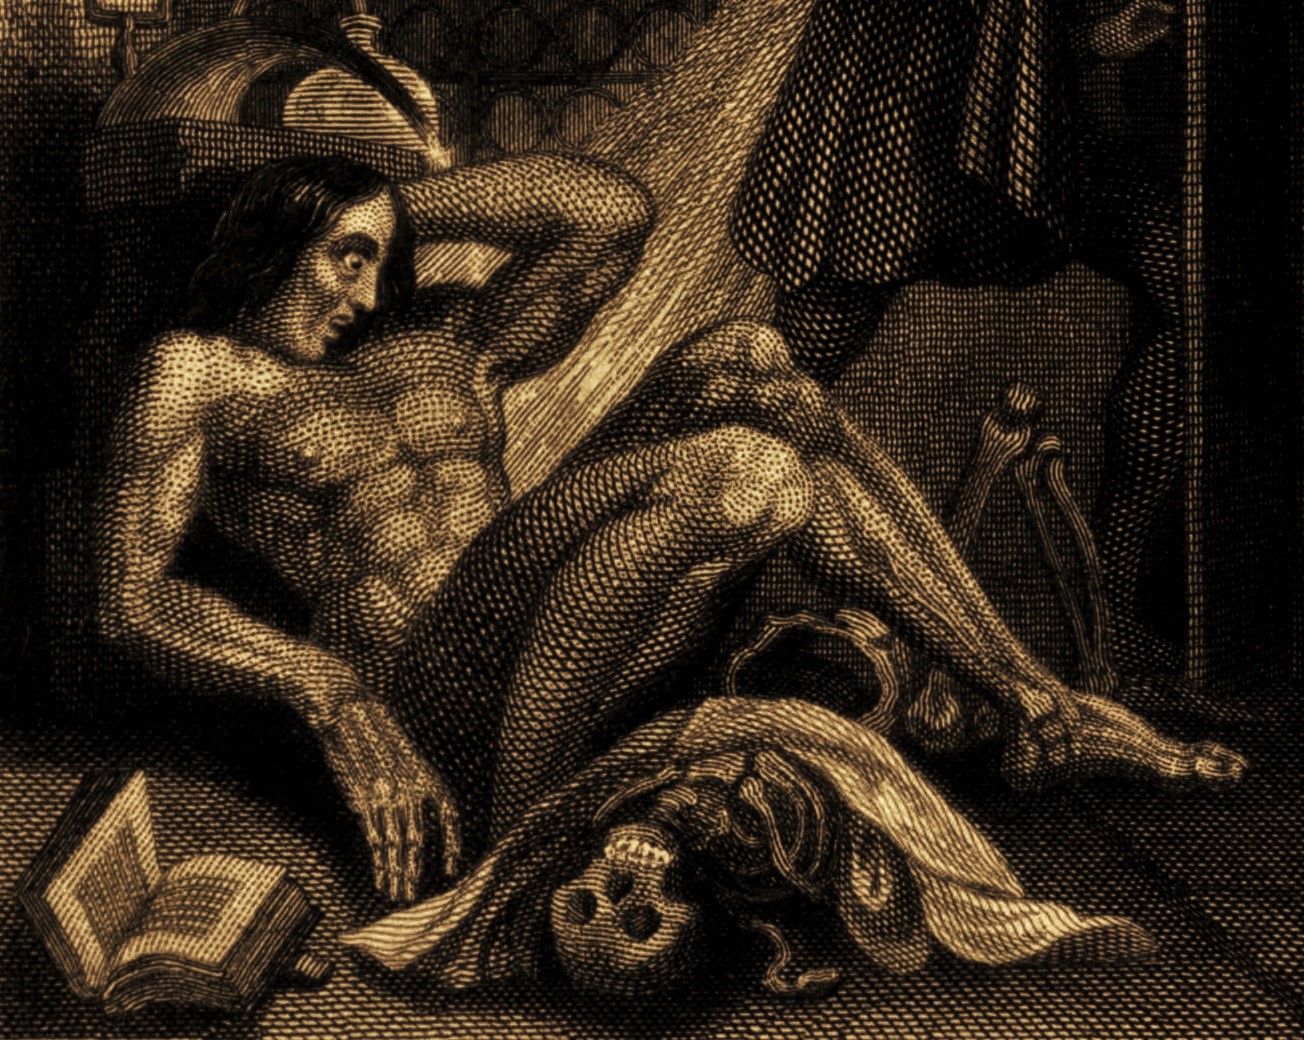 A black and white illustration of a nude man's body with an off-center head, eyes wide. On the floor are an open book and a skull.